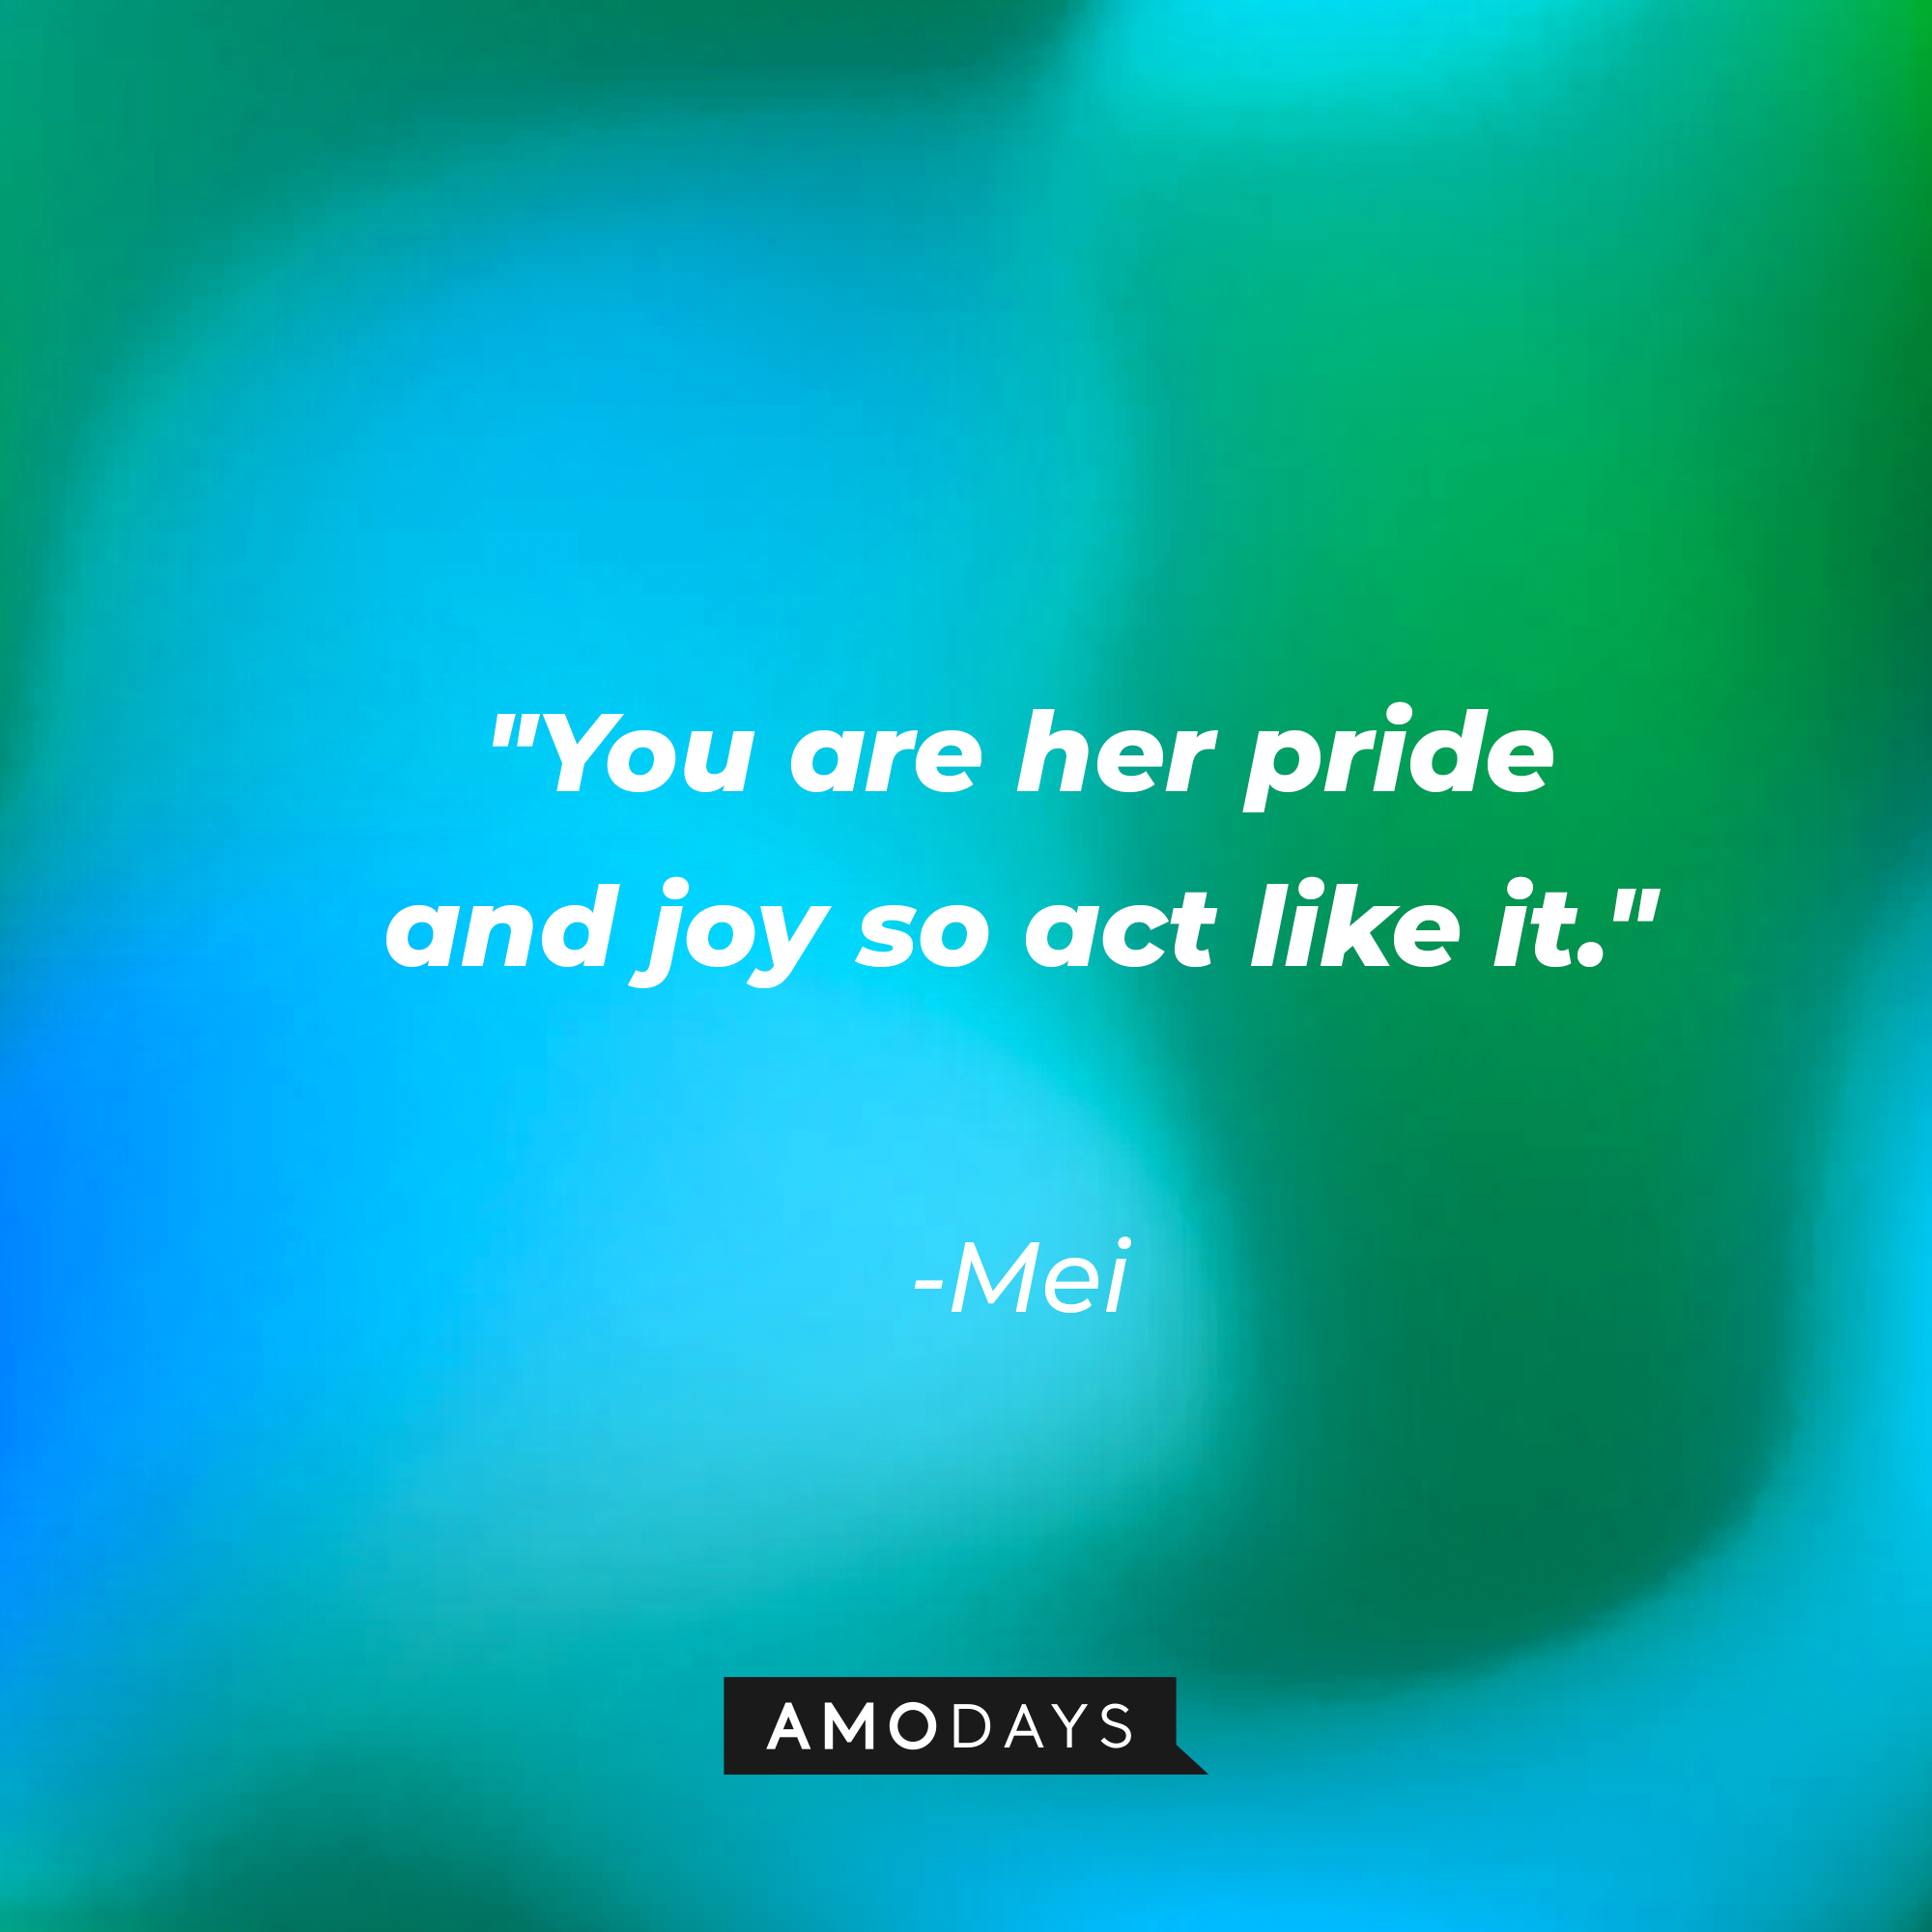 Mei's quote: "You are her pride and joy so act like it." | Source: AmoDays